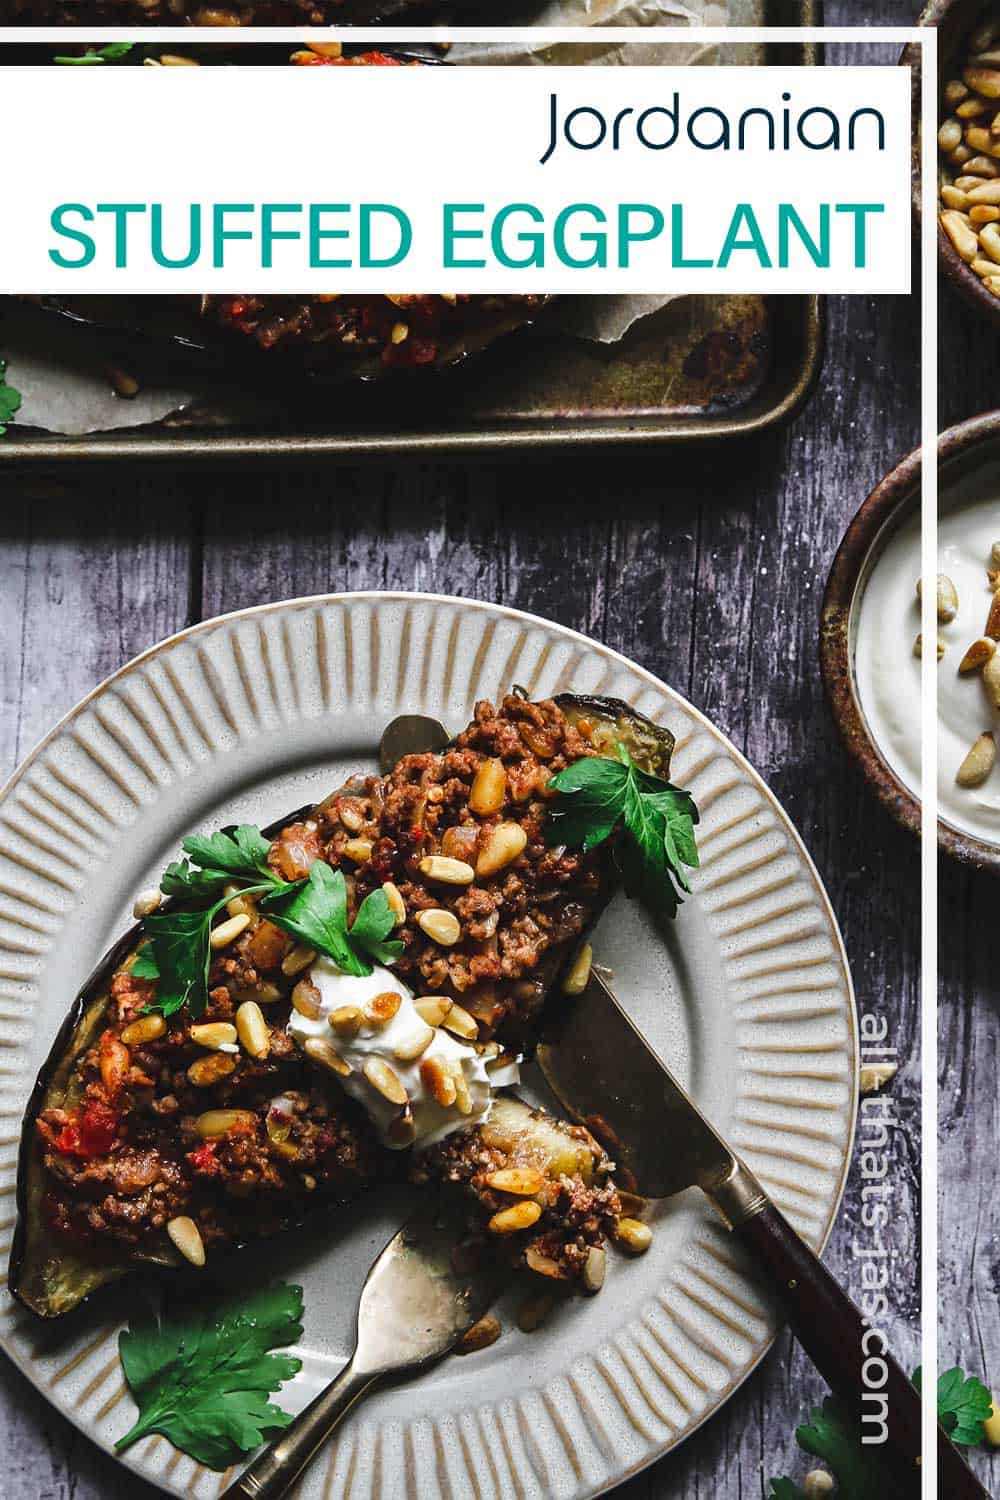 Served stuffed eggplant on a plate with text overlay.